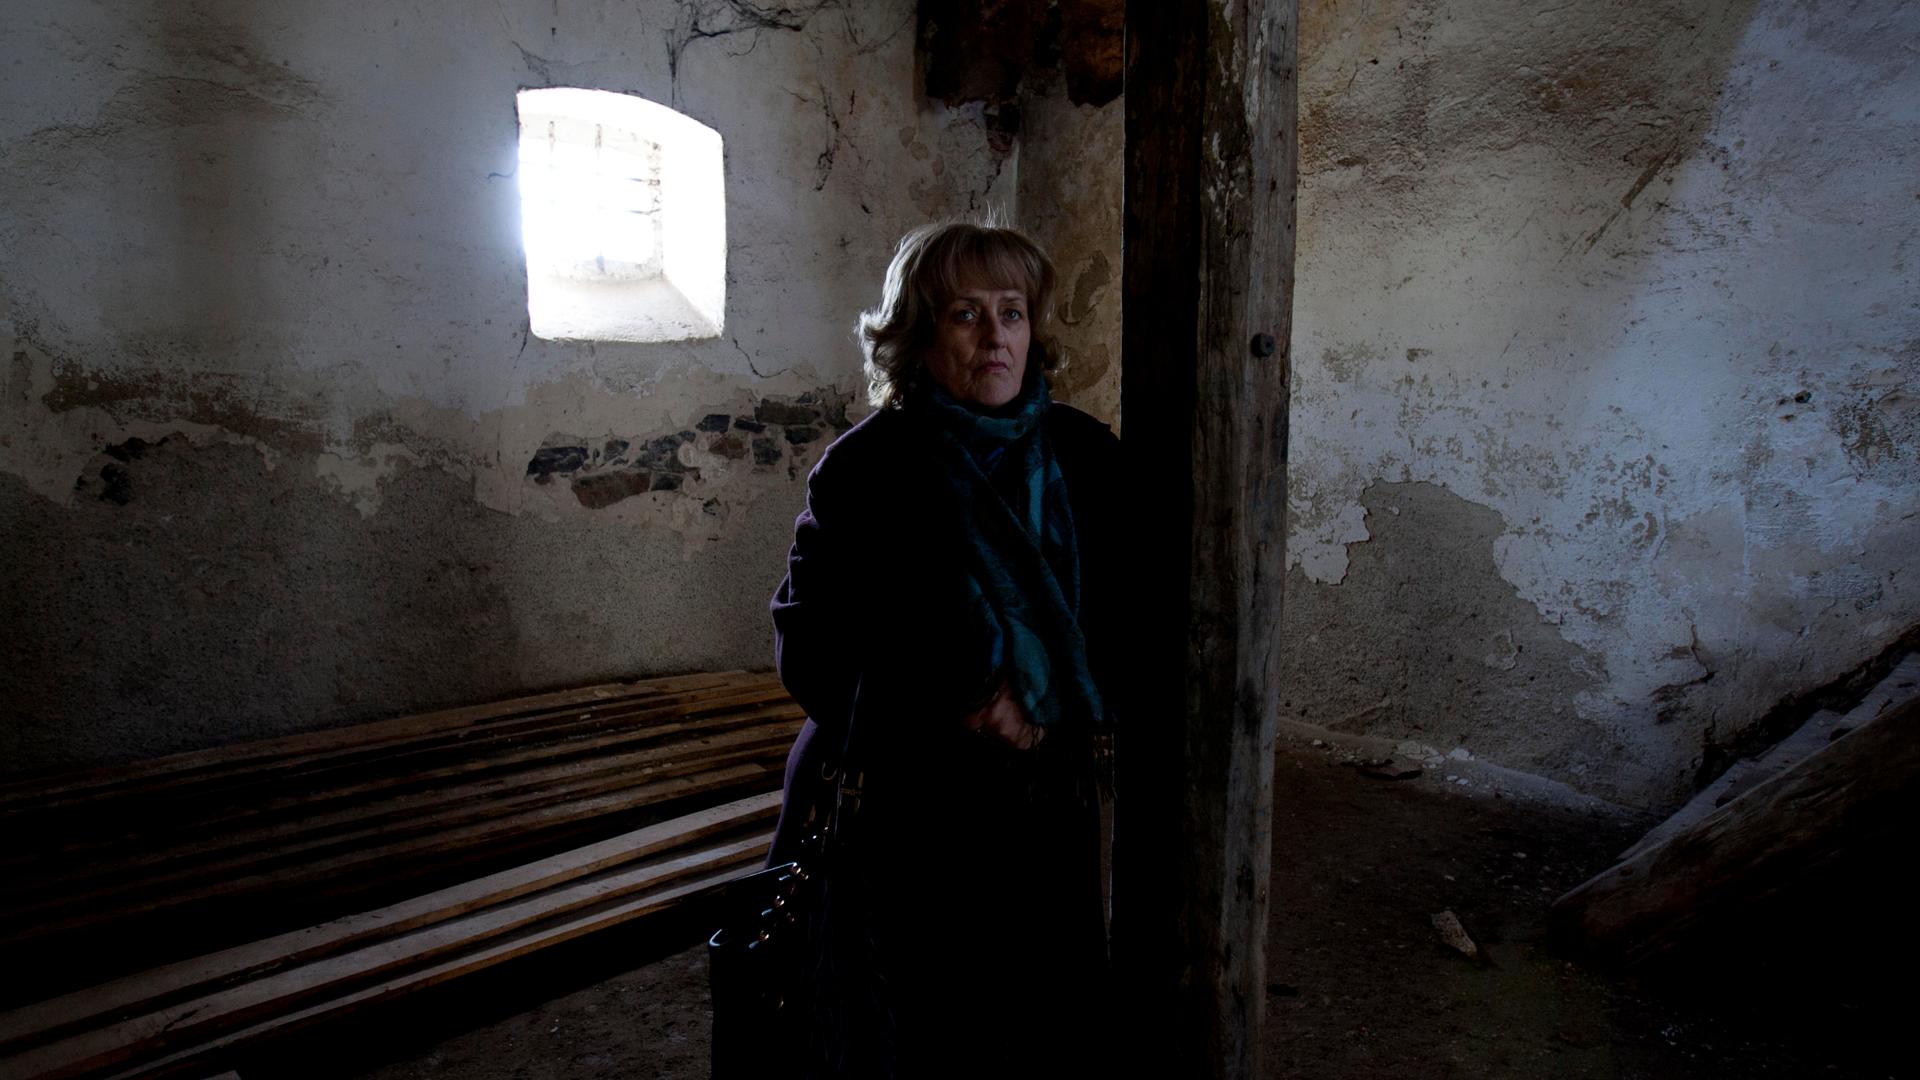 A woman stands in an abandoned building with light coming through the window.